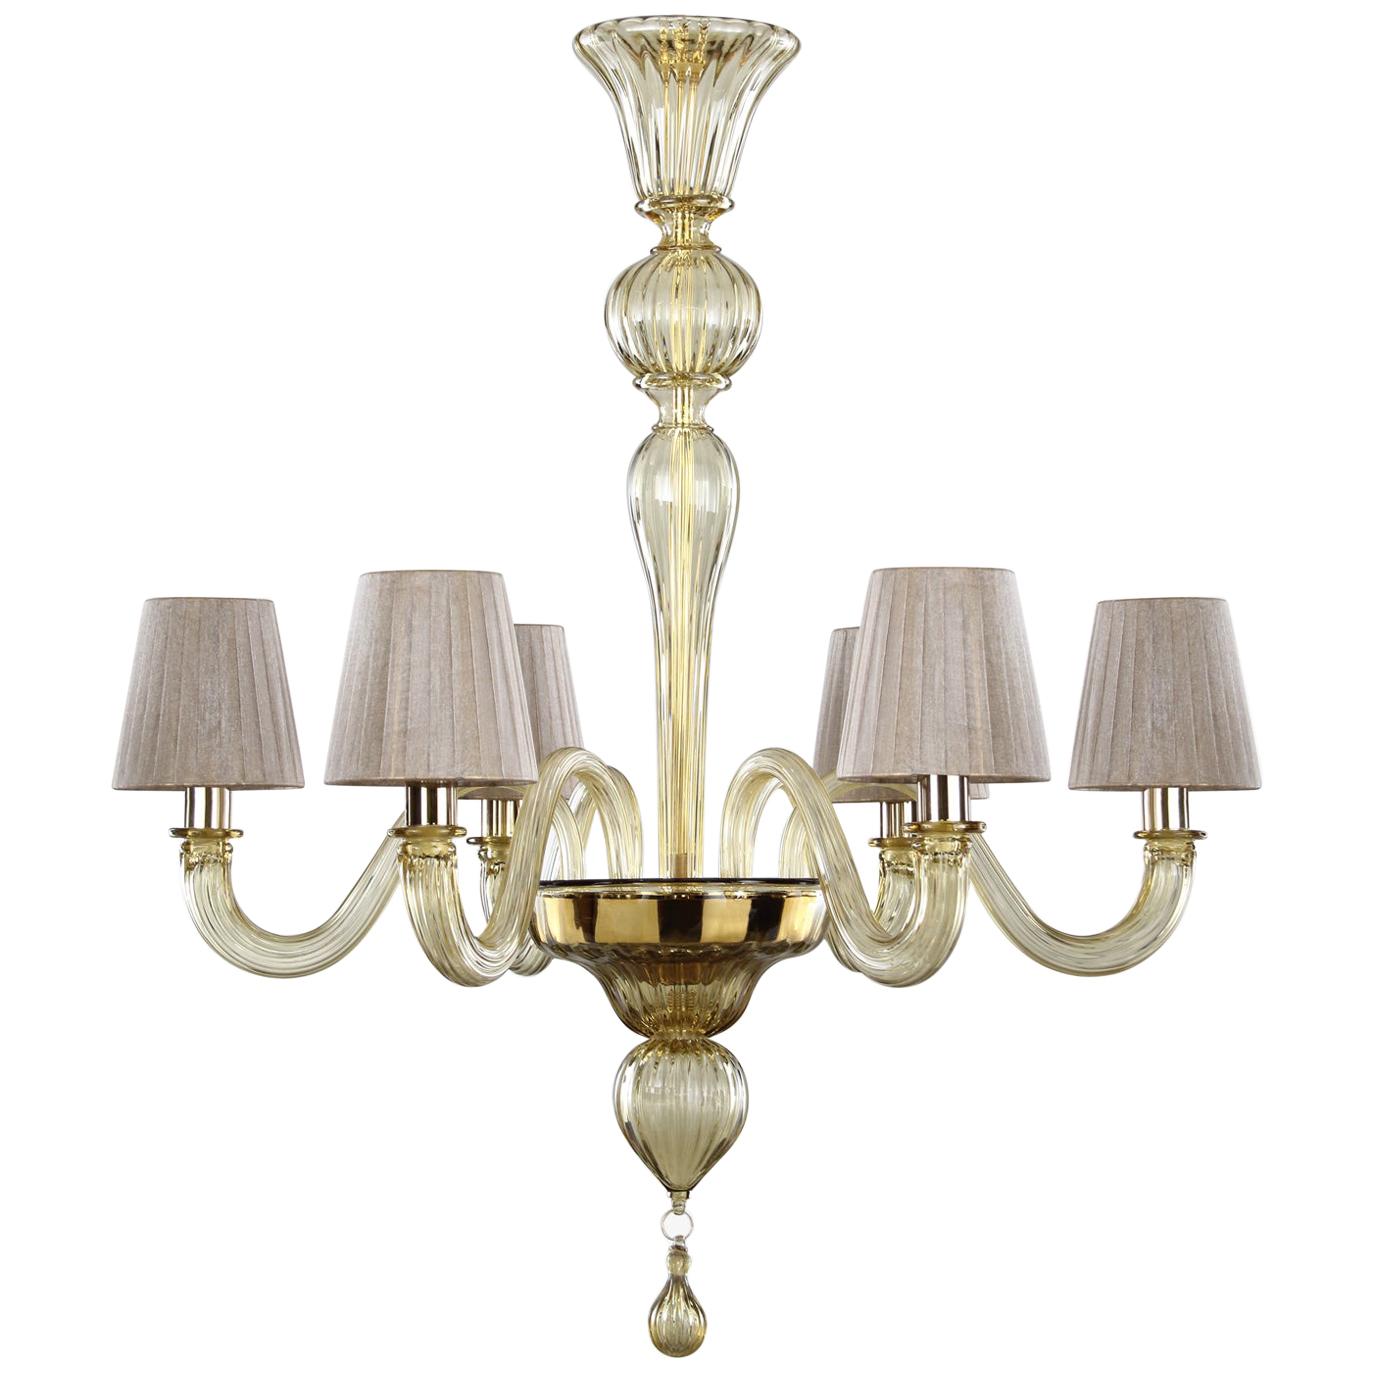 Chandelier 6 Arms Smoky Quartz Murano Glass, Lampshades Chapeau by Multiforme For Sale